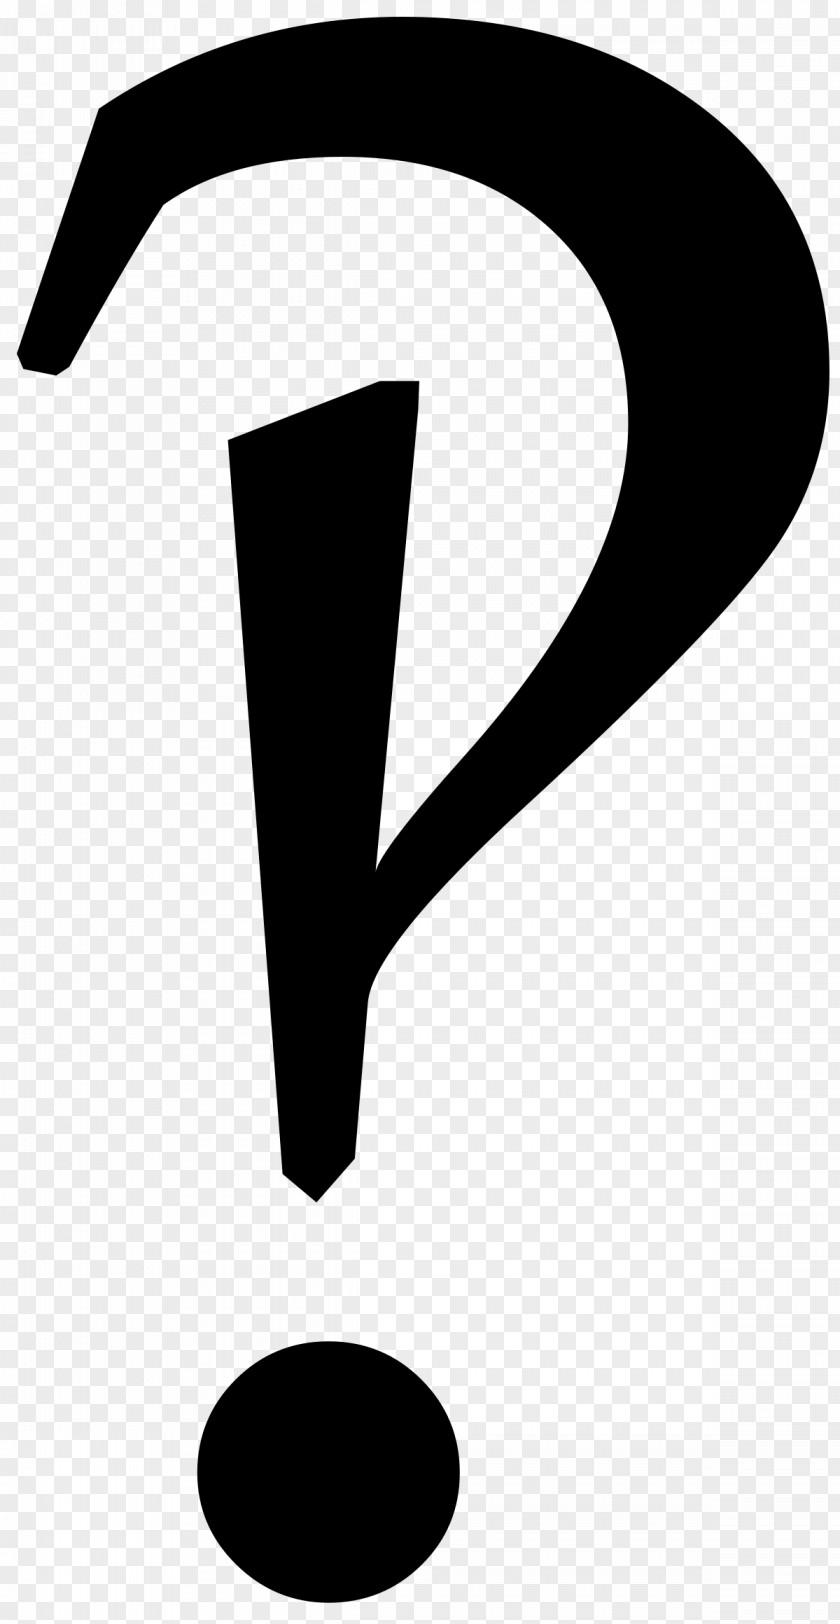 Question Interrobang Exclamation Mark Punctuation Rhetorical PNG